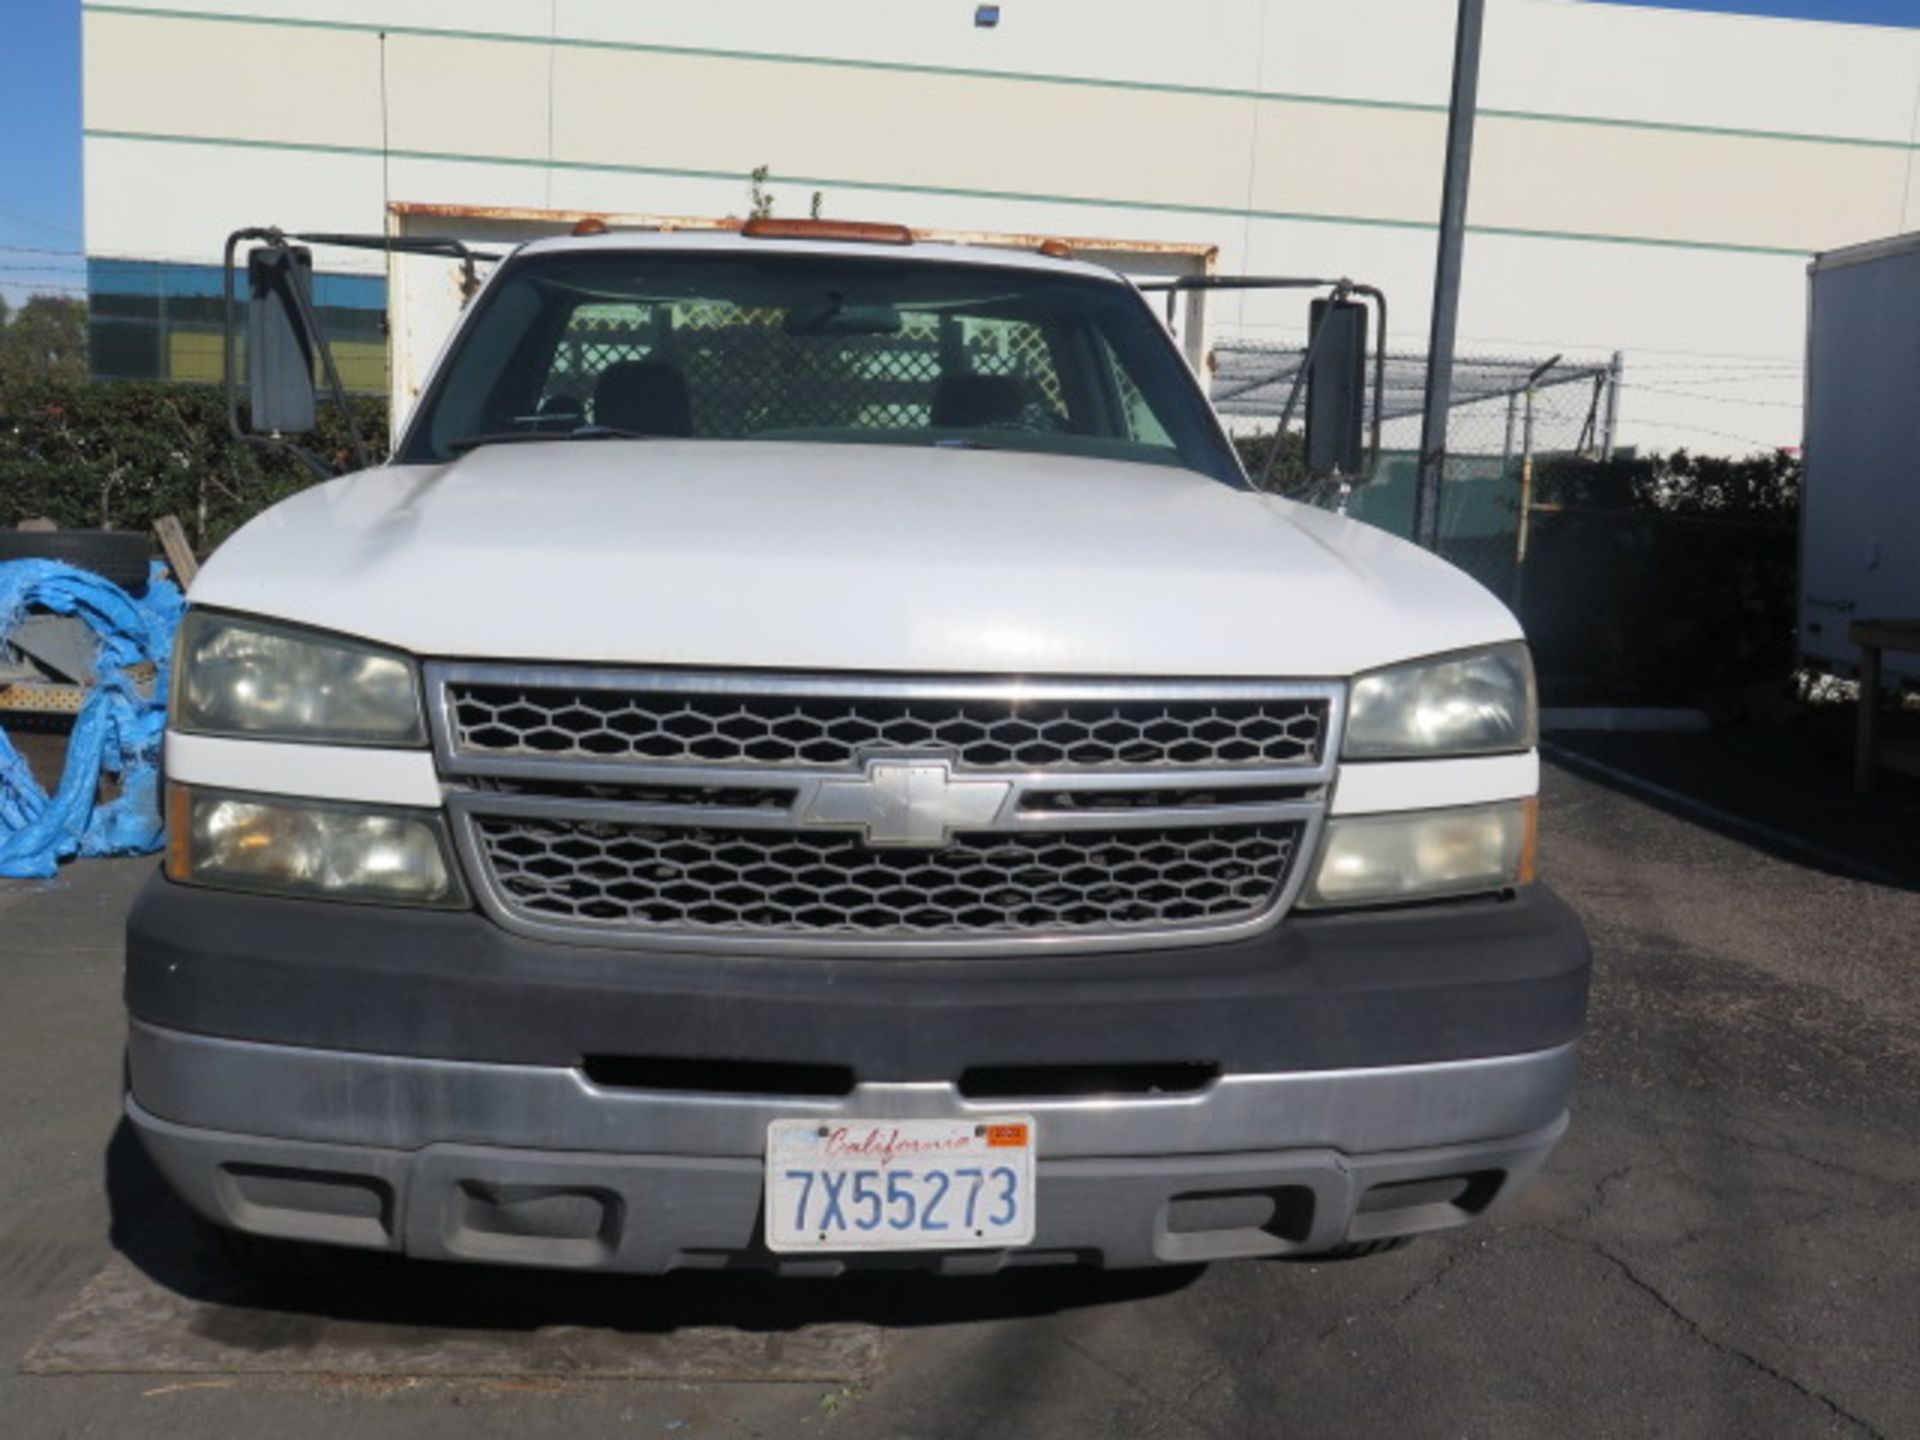 Chevrolet Silverado 3500 12’ Stake-Bed Truck Lisc# 7X55273 w/ Vortec 8100 8.1L Gas, Auto, SOLD AS IS - Image 2 of 24